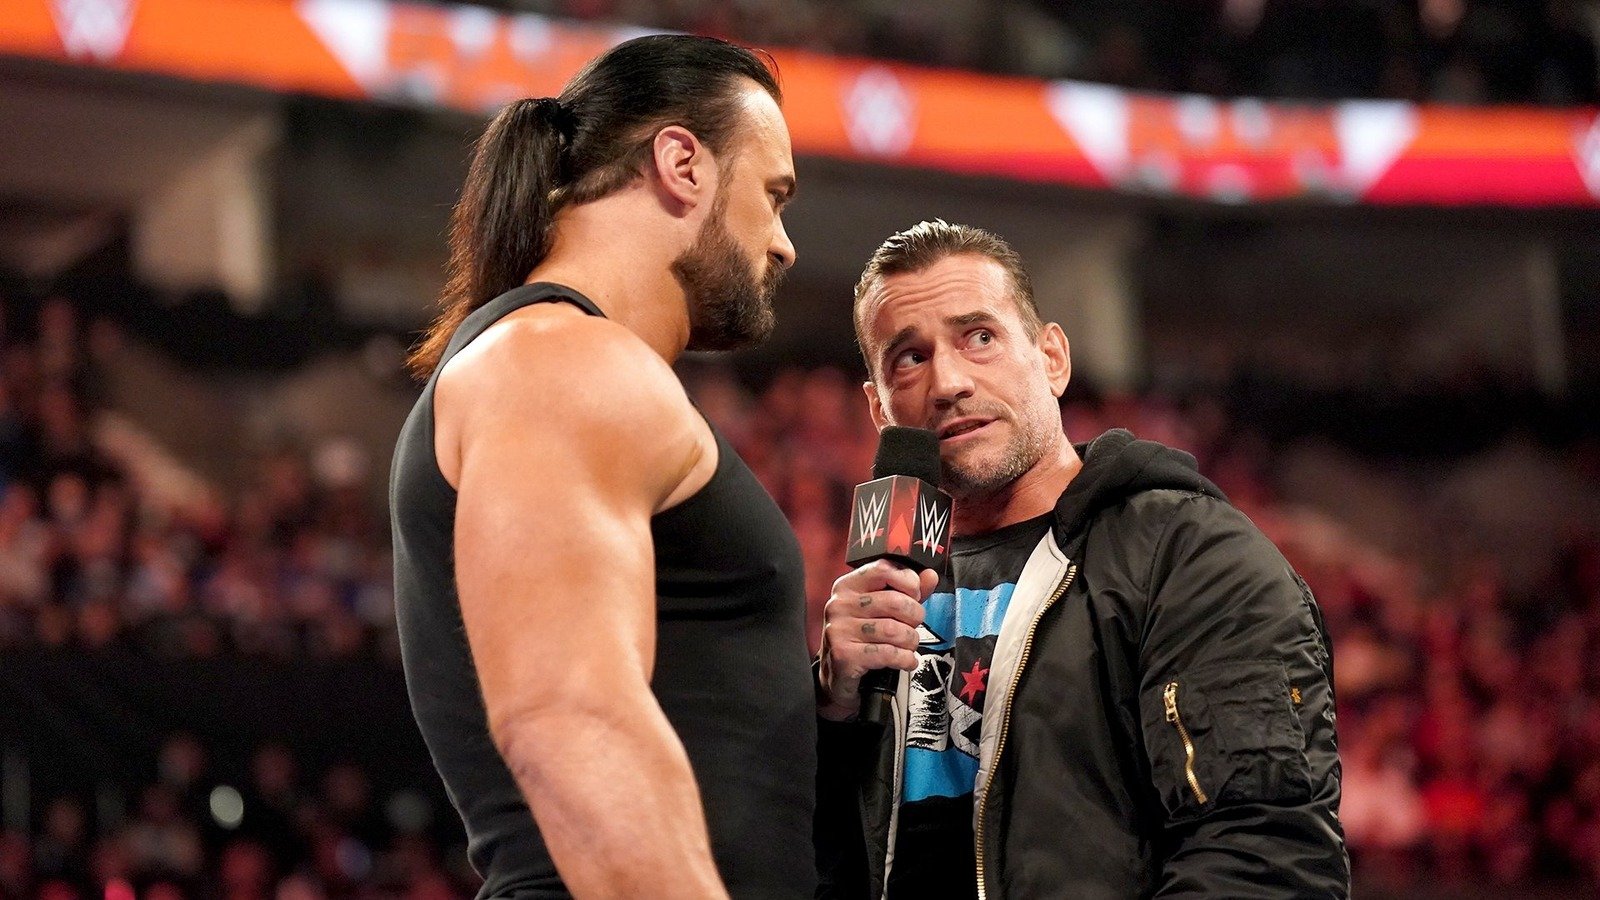 Drew McIntyre Slams CM Punk, Asserting: “I Refuse to Be Labeled a Pathetic, Cowardly Figure!”